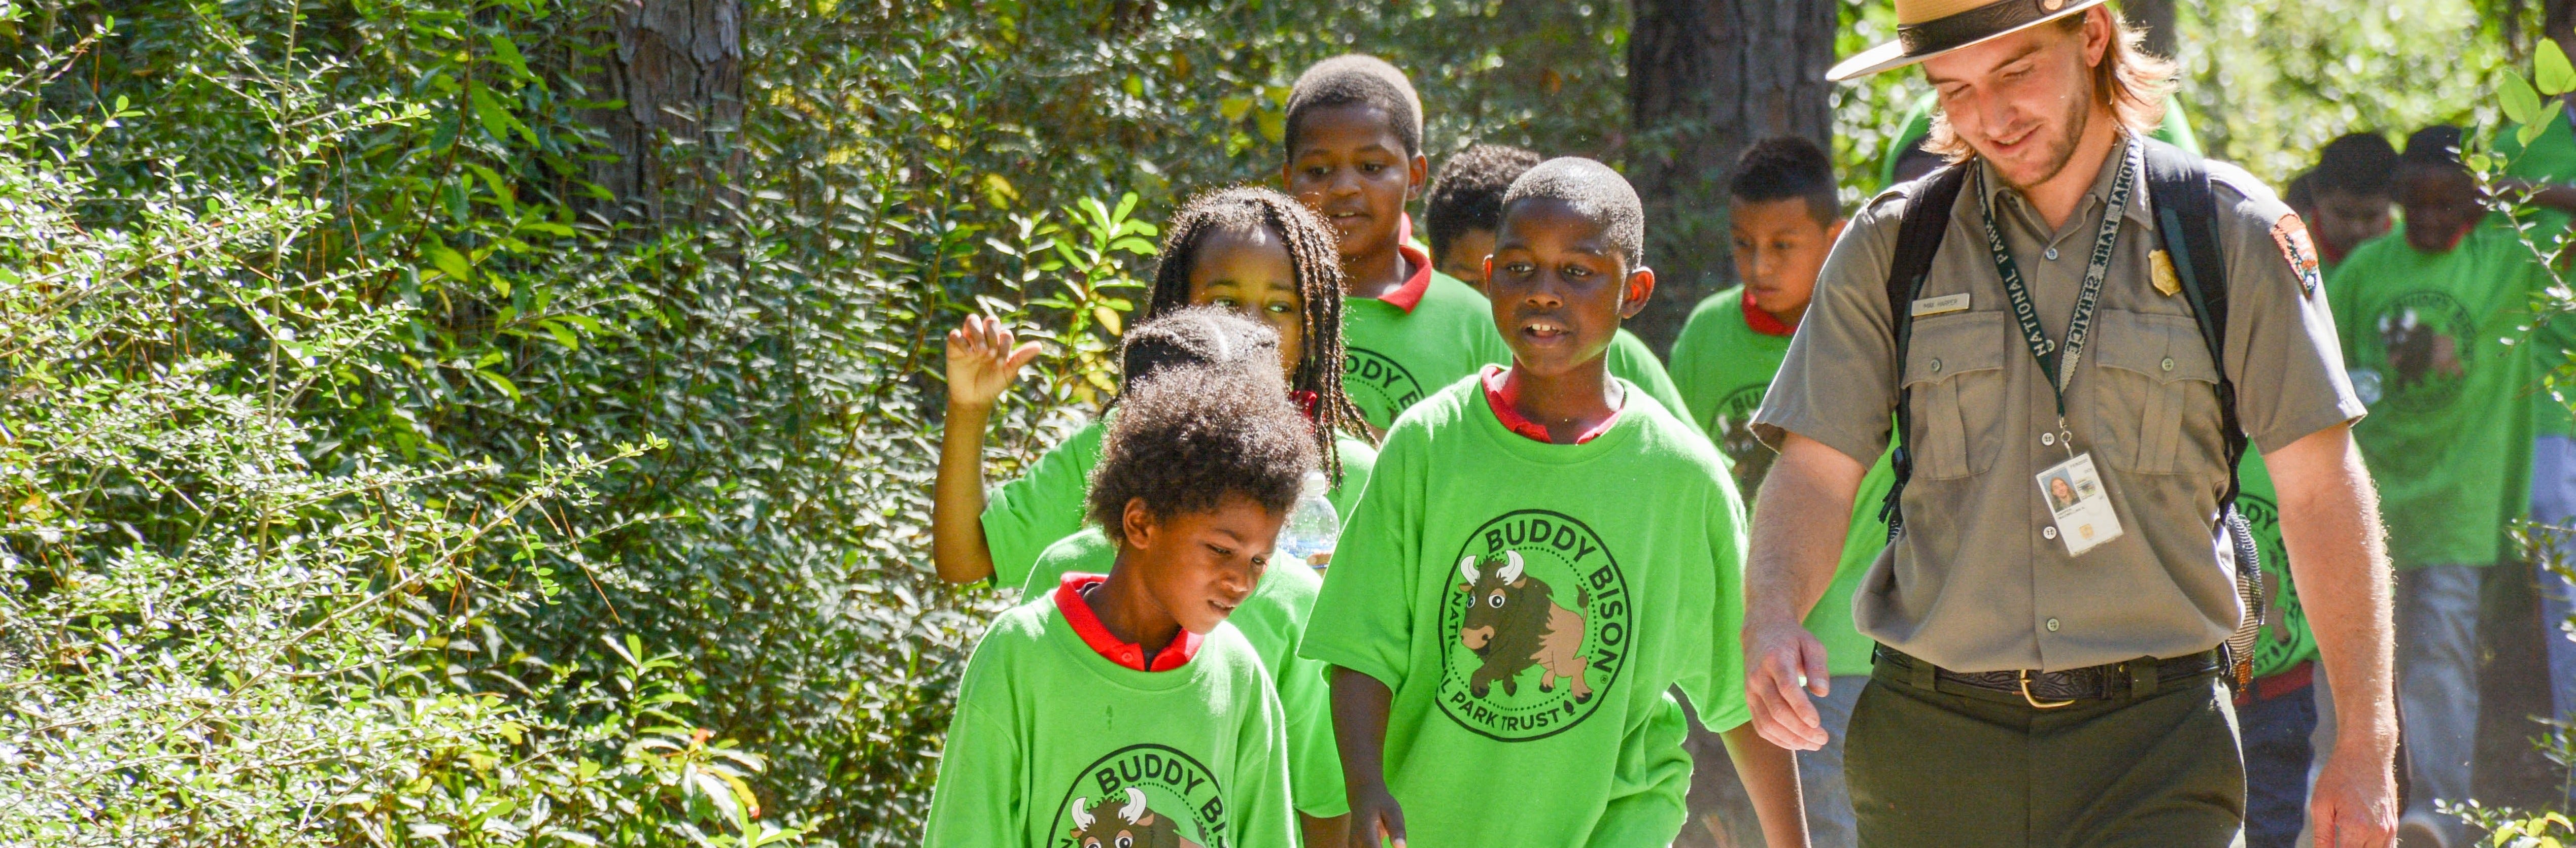 Time to Celebrate National Kids to Parks Day!